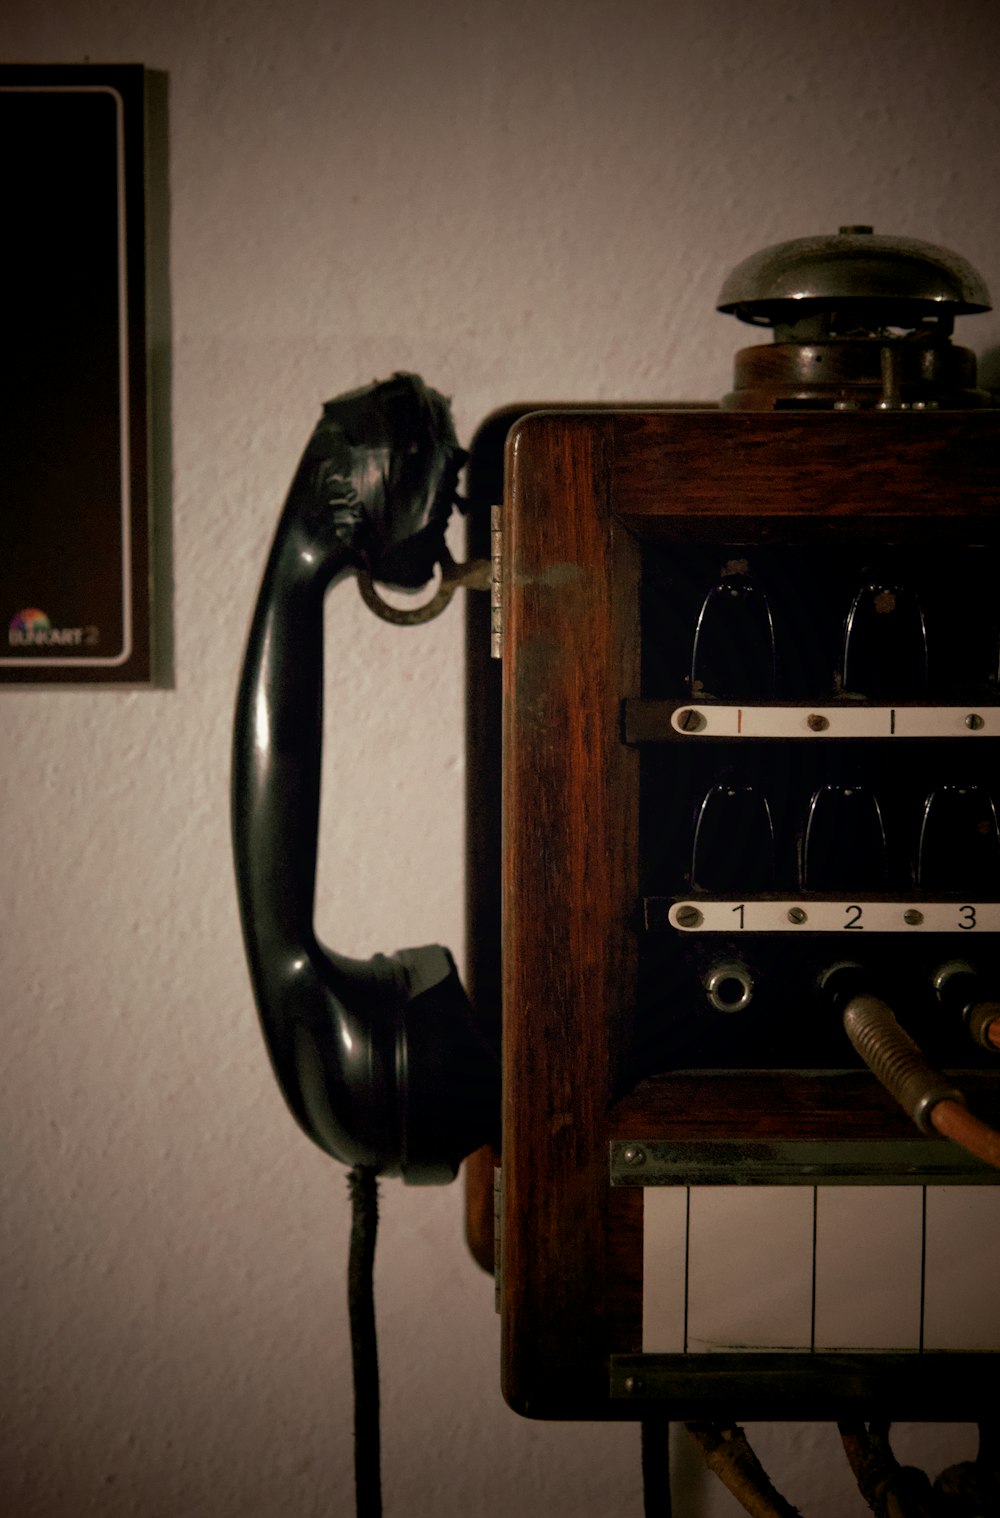 an old fashioned telephone with wine glasses on it